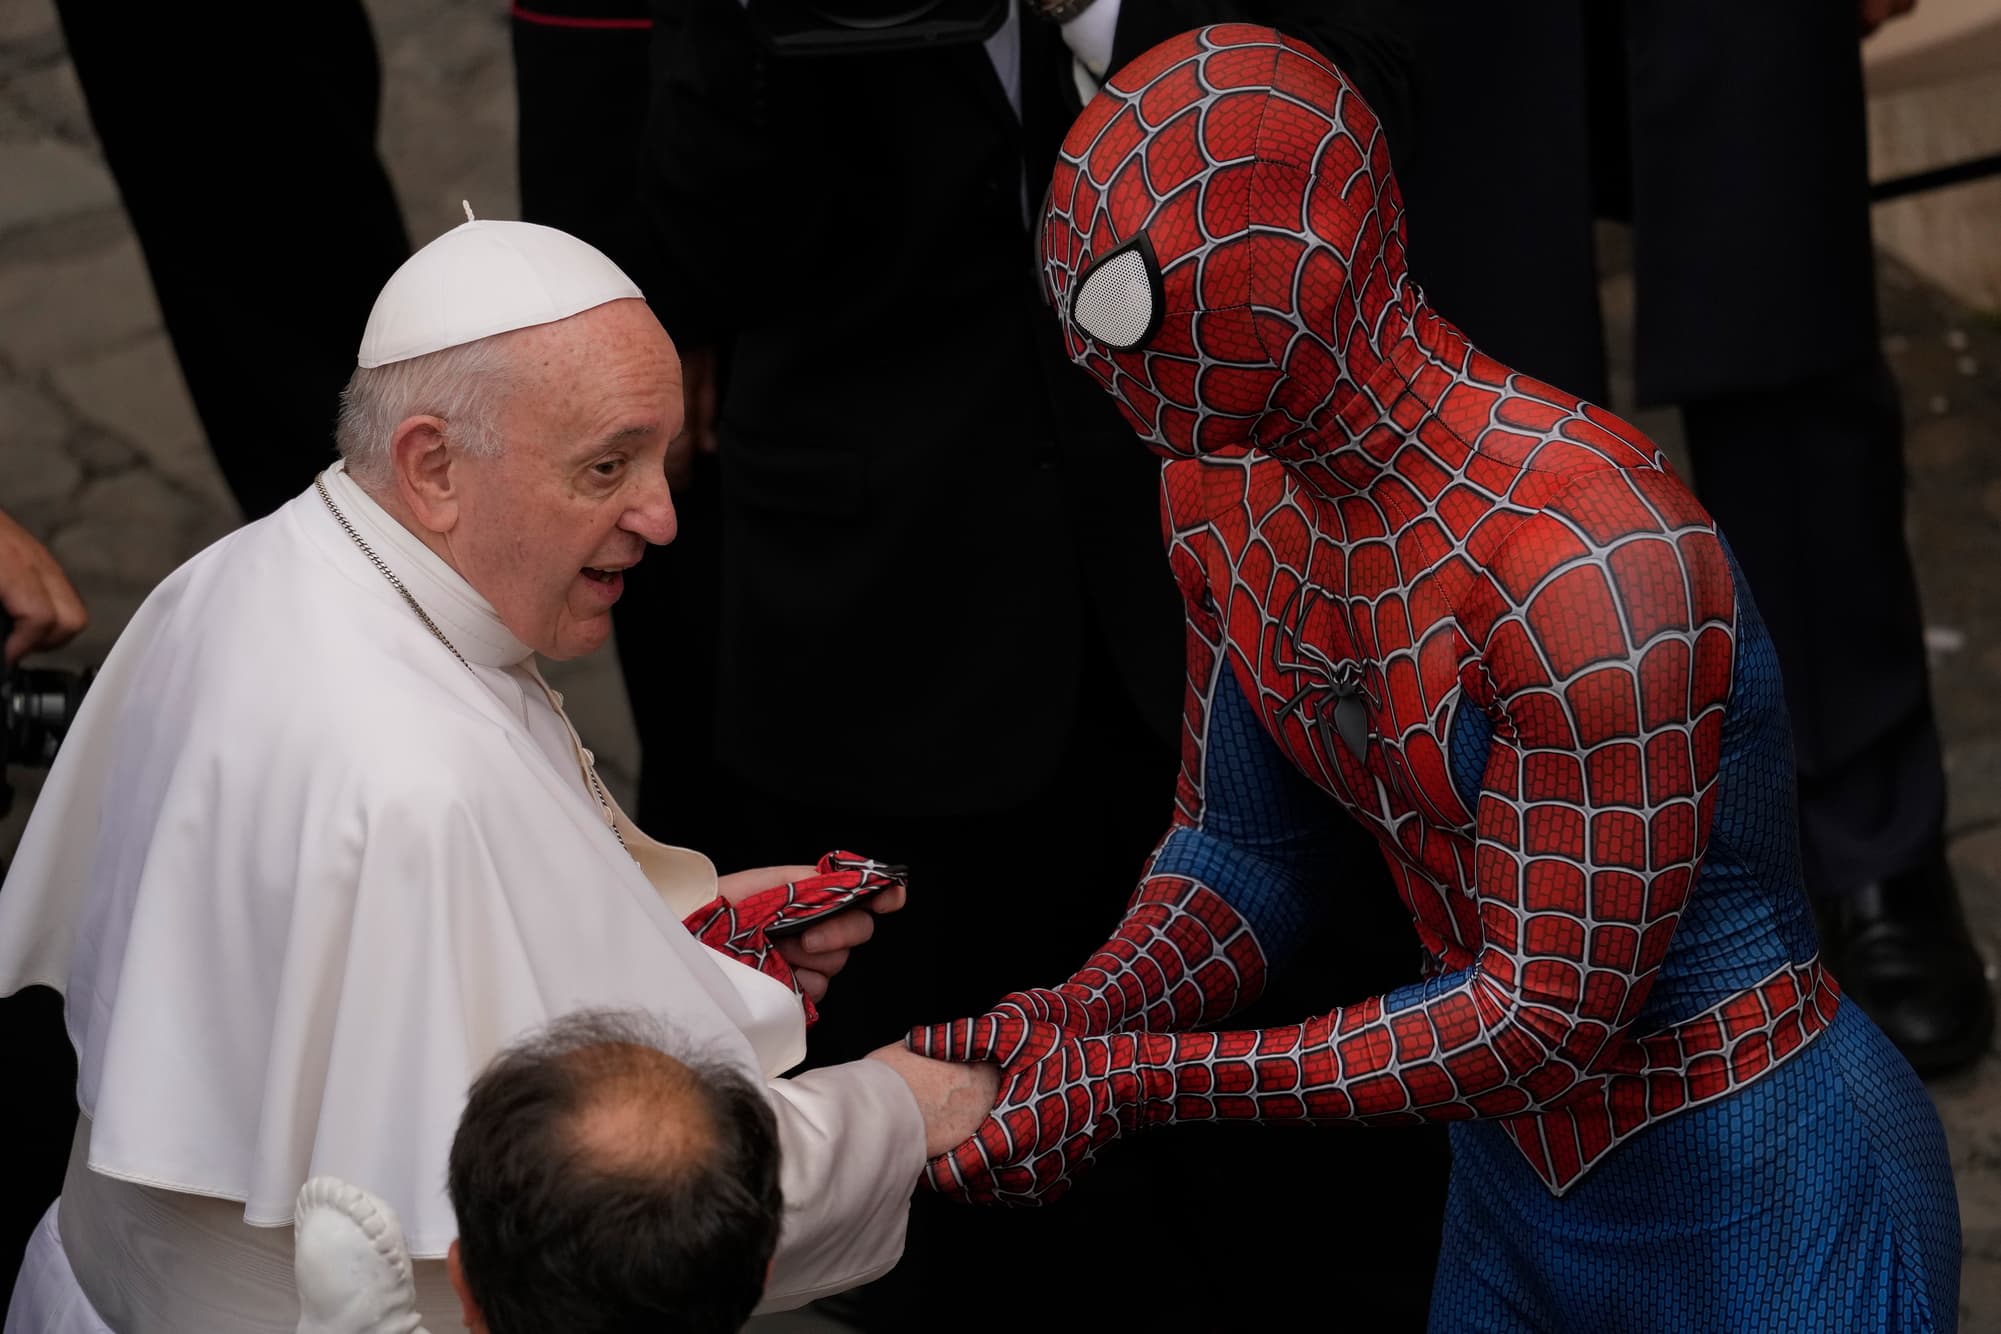 Spider-Man and the Pope ((AP Photo/Andrew Medichini)